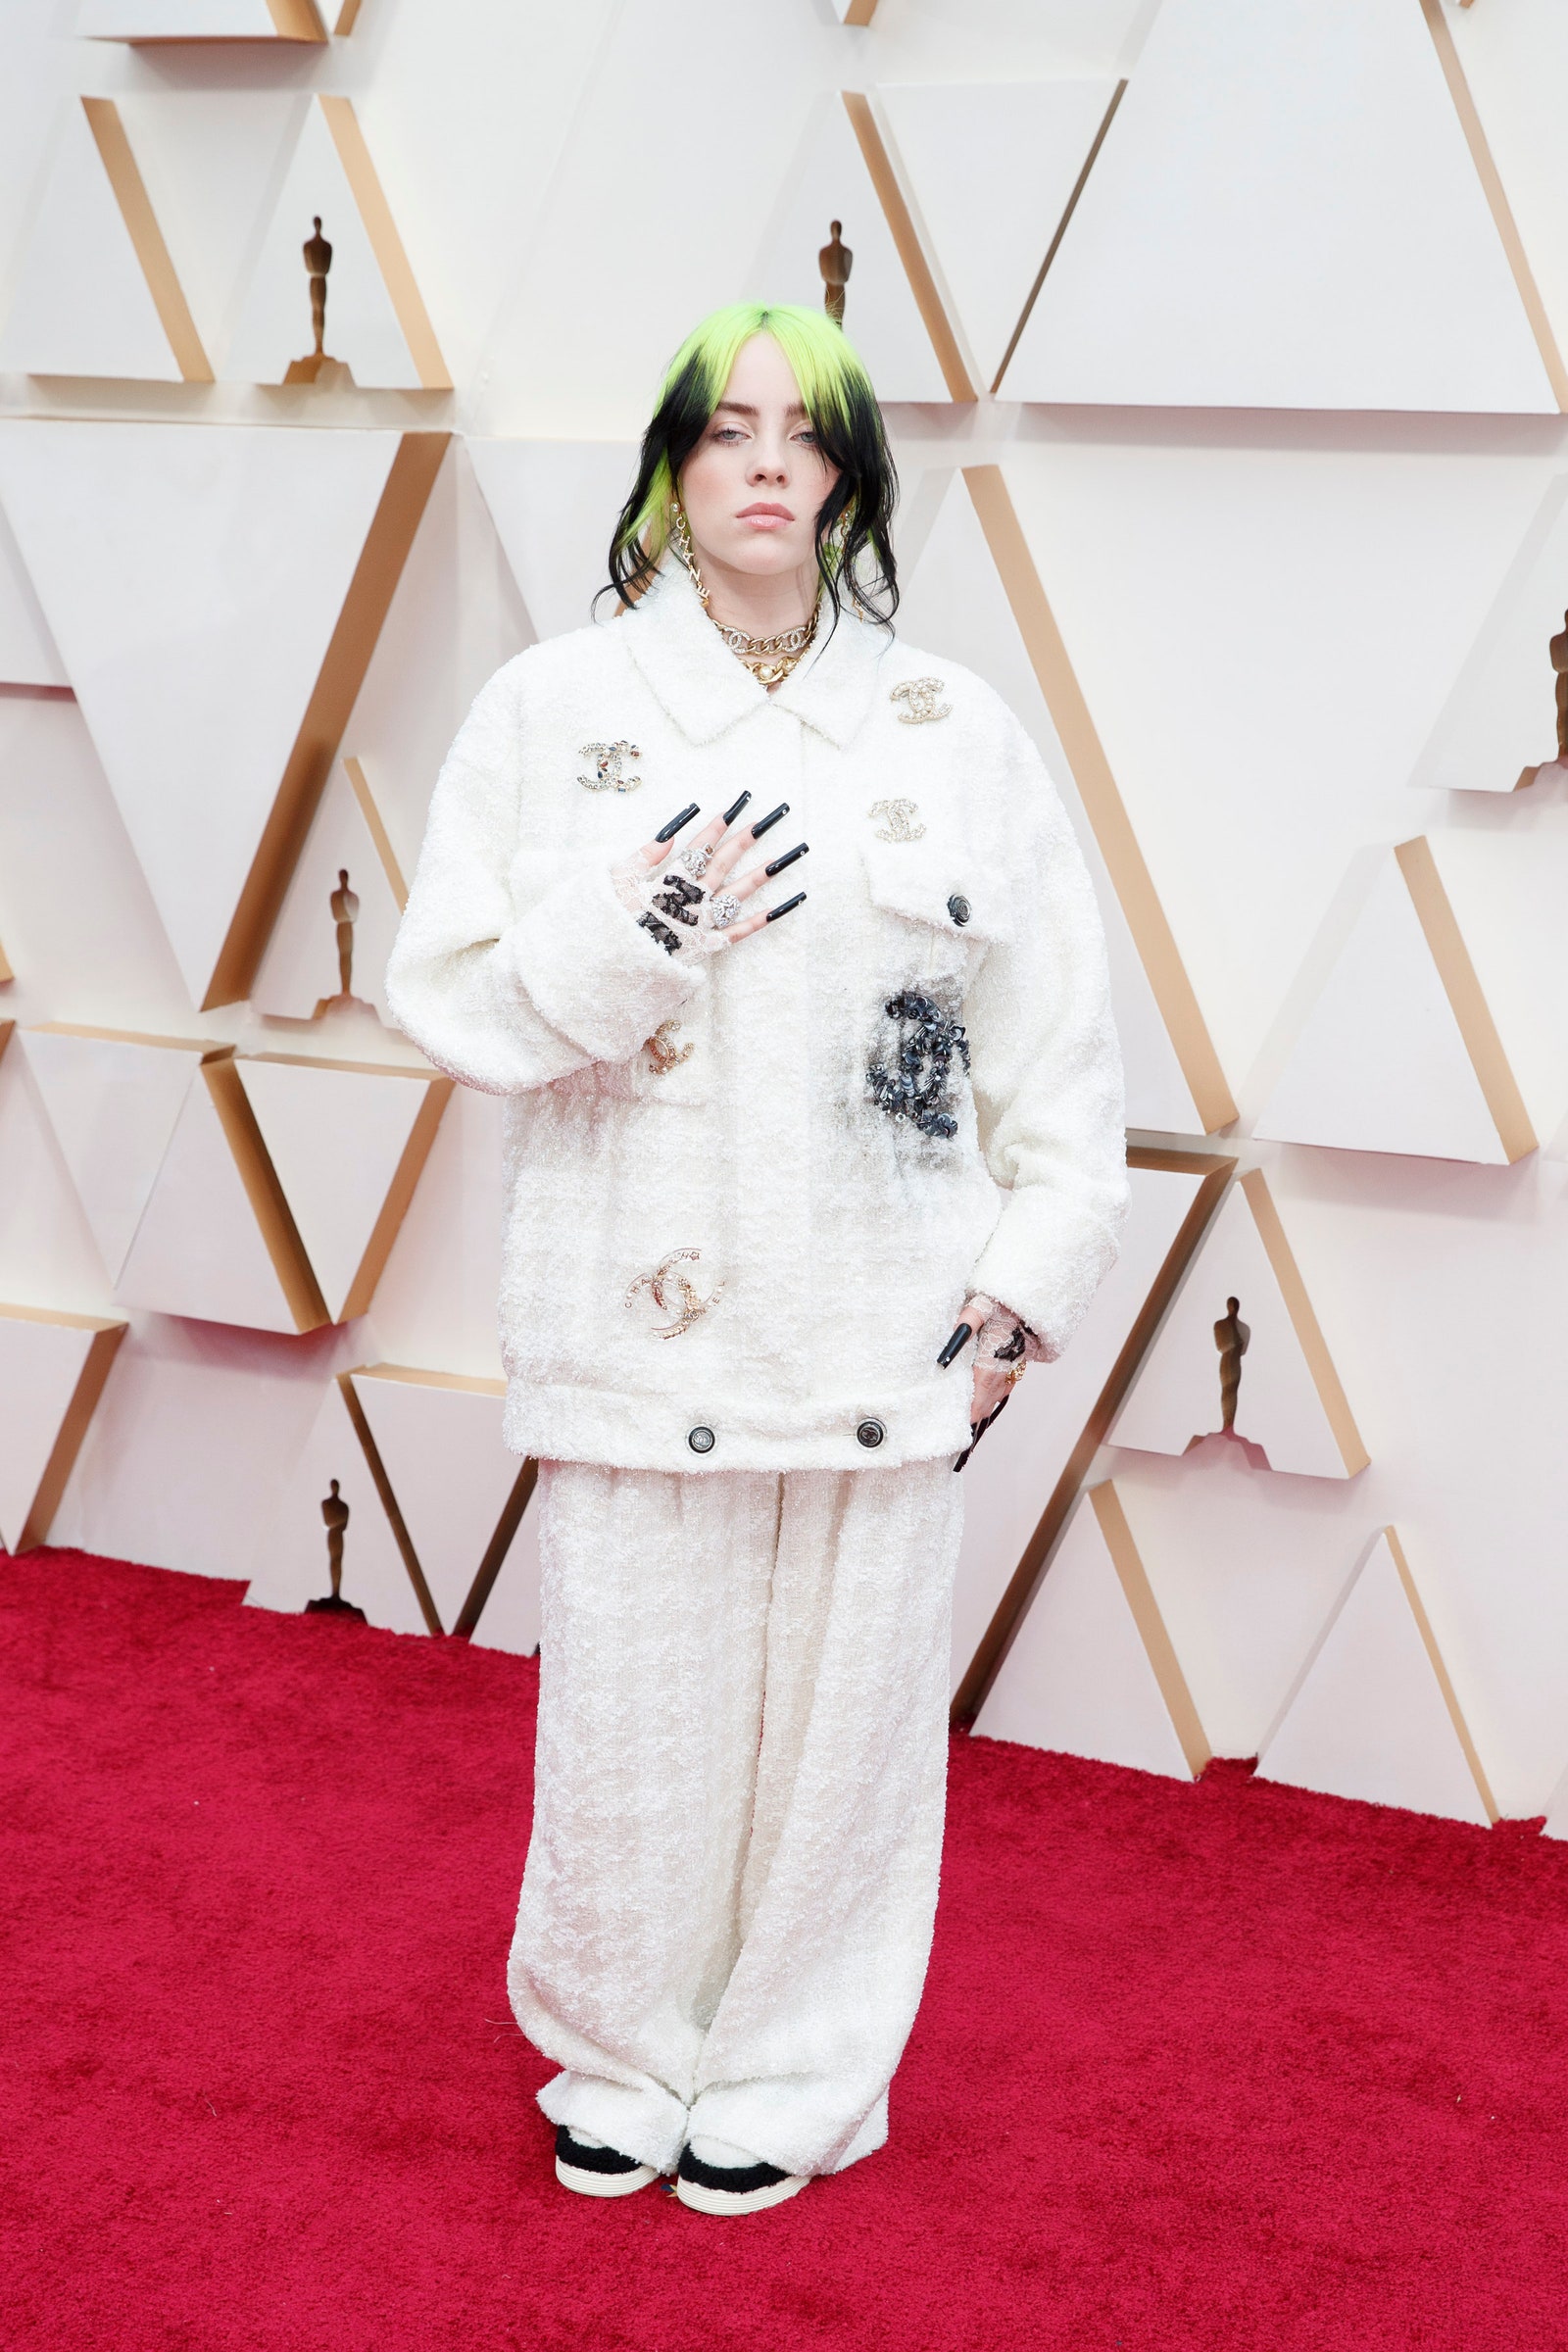 Billie Eilish Wore One of Her Thrift Store Finds to the Golden Globes